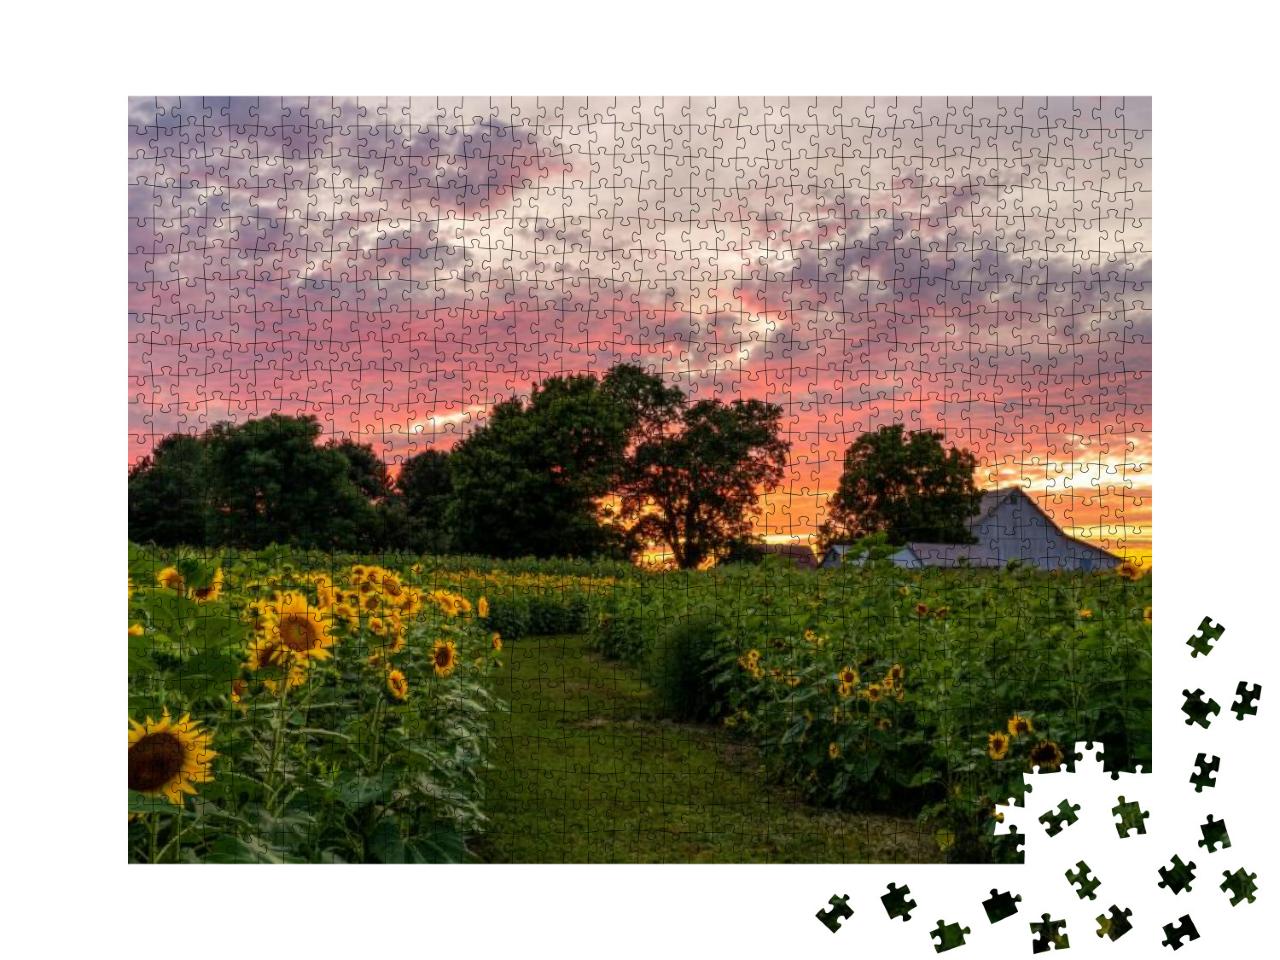 Colorful Sunset on a Rural Farm Field Full of Sunflowers... Jigsaw Puzzle with 1000 pieces